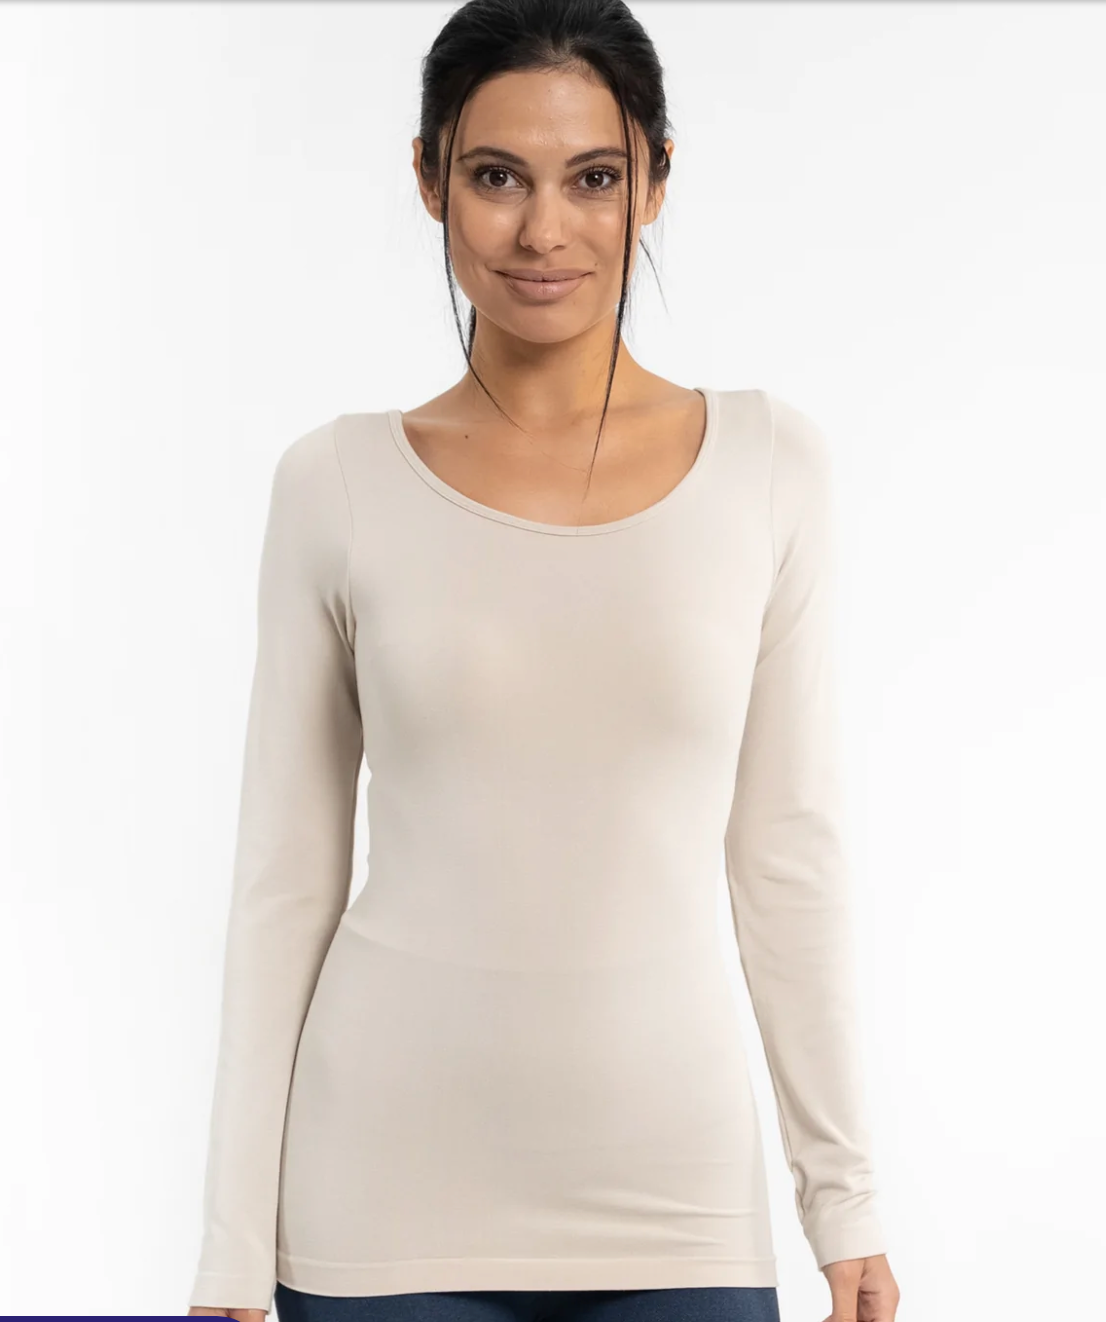 ROUND NECK/ BOAT NECK LONG SLEEVE TOP (2 colors)